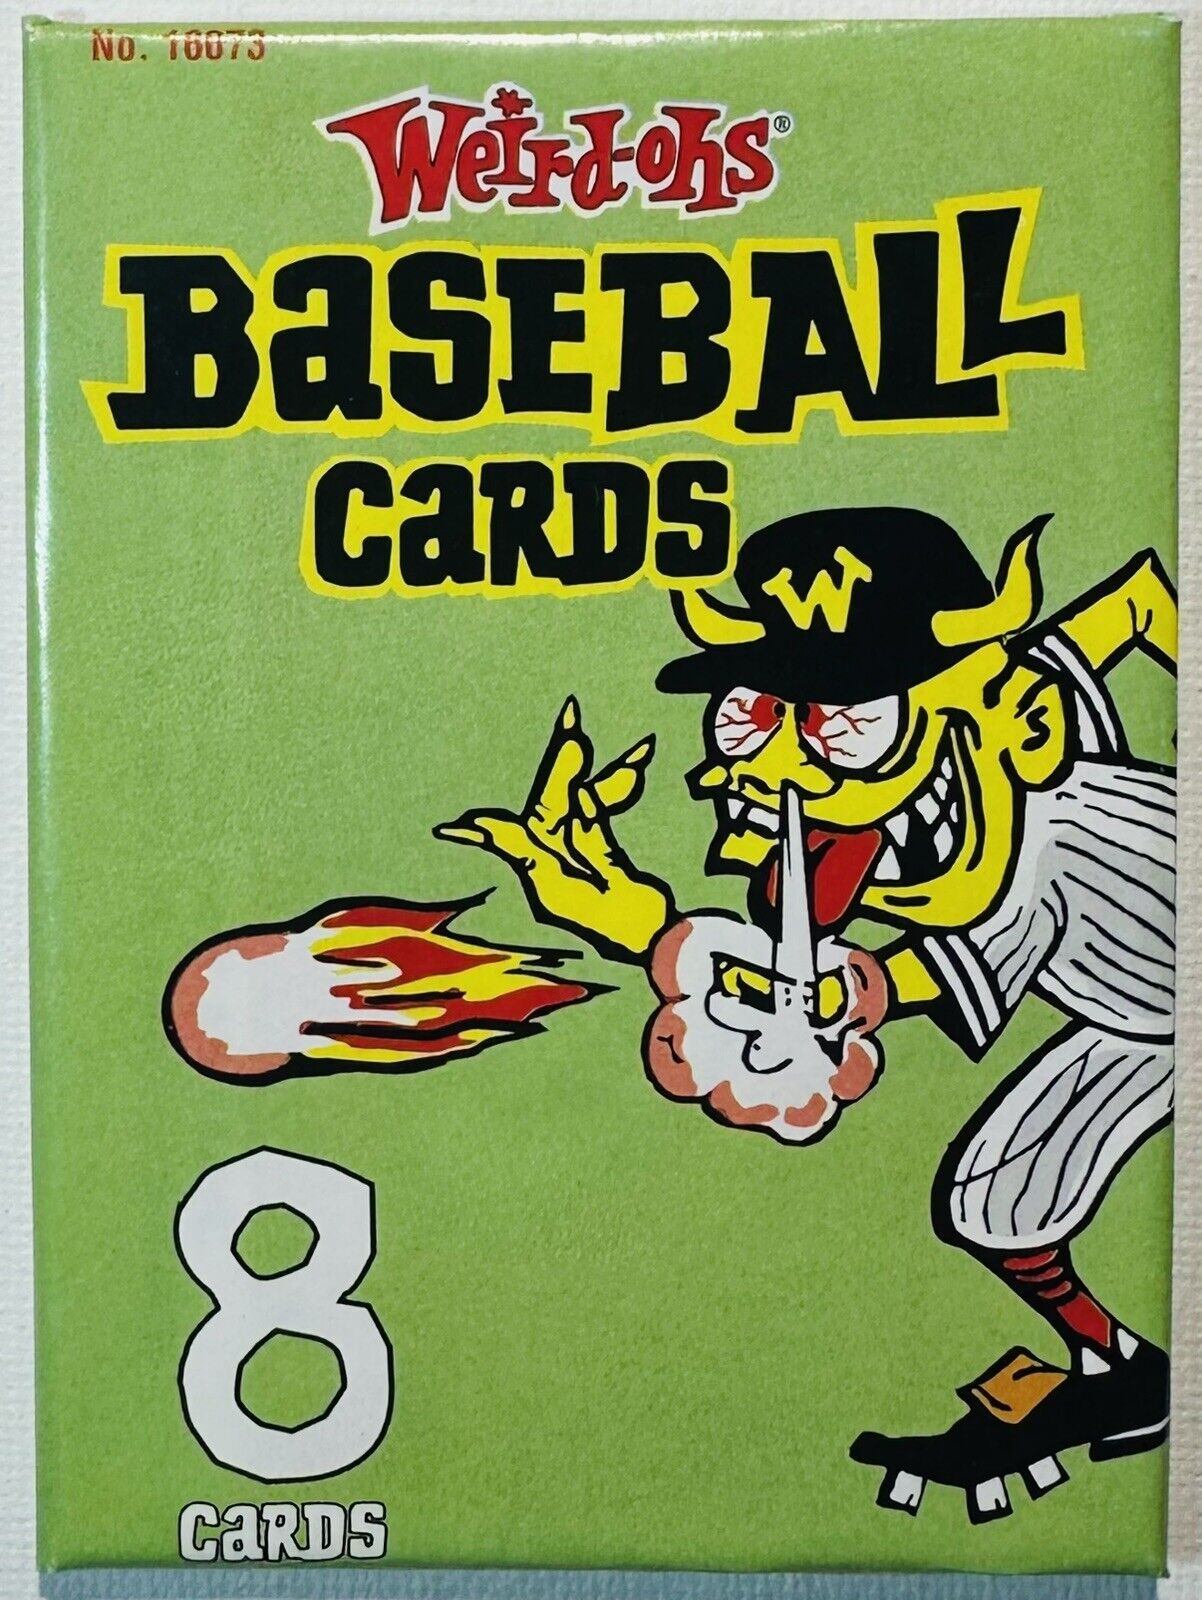 WEIRD-OHS BASEBALL CARDS--ONE UNOPENED WAX PACK--2007 RE-ISSUE OF 1970\'s CARDS